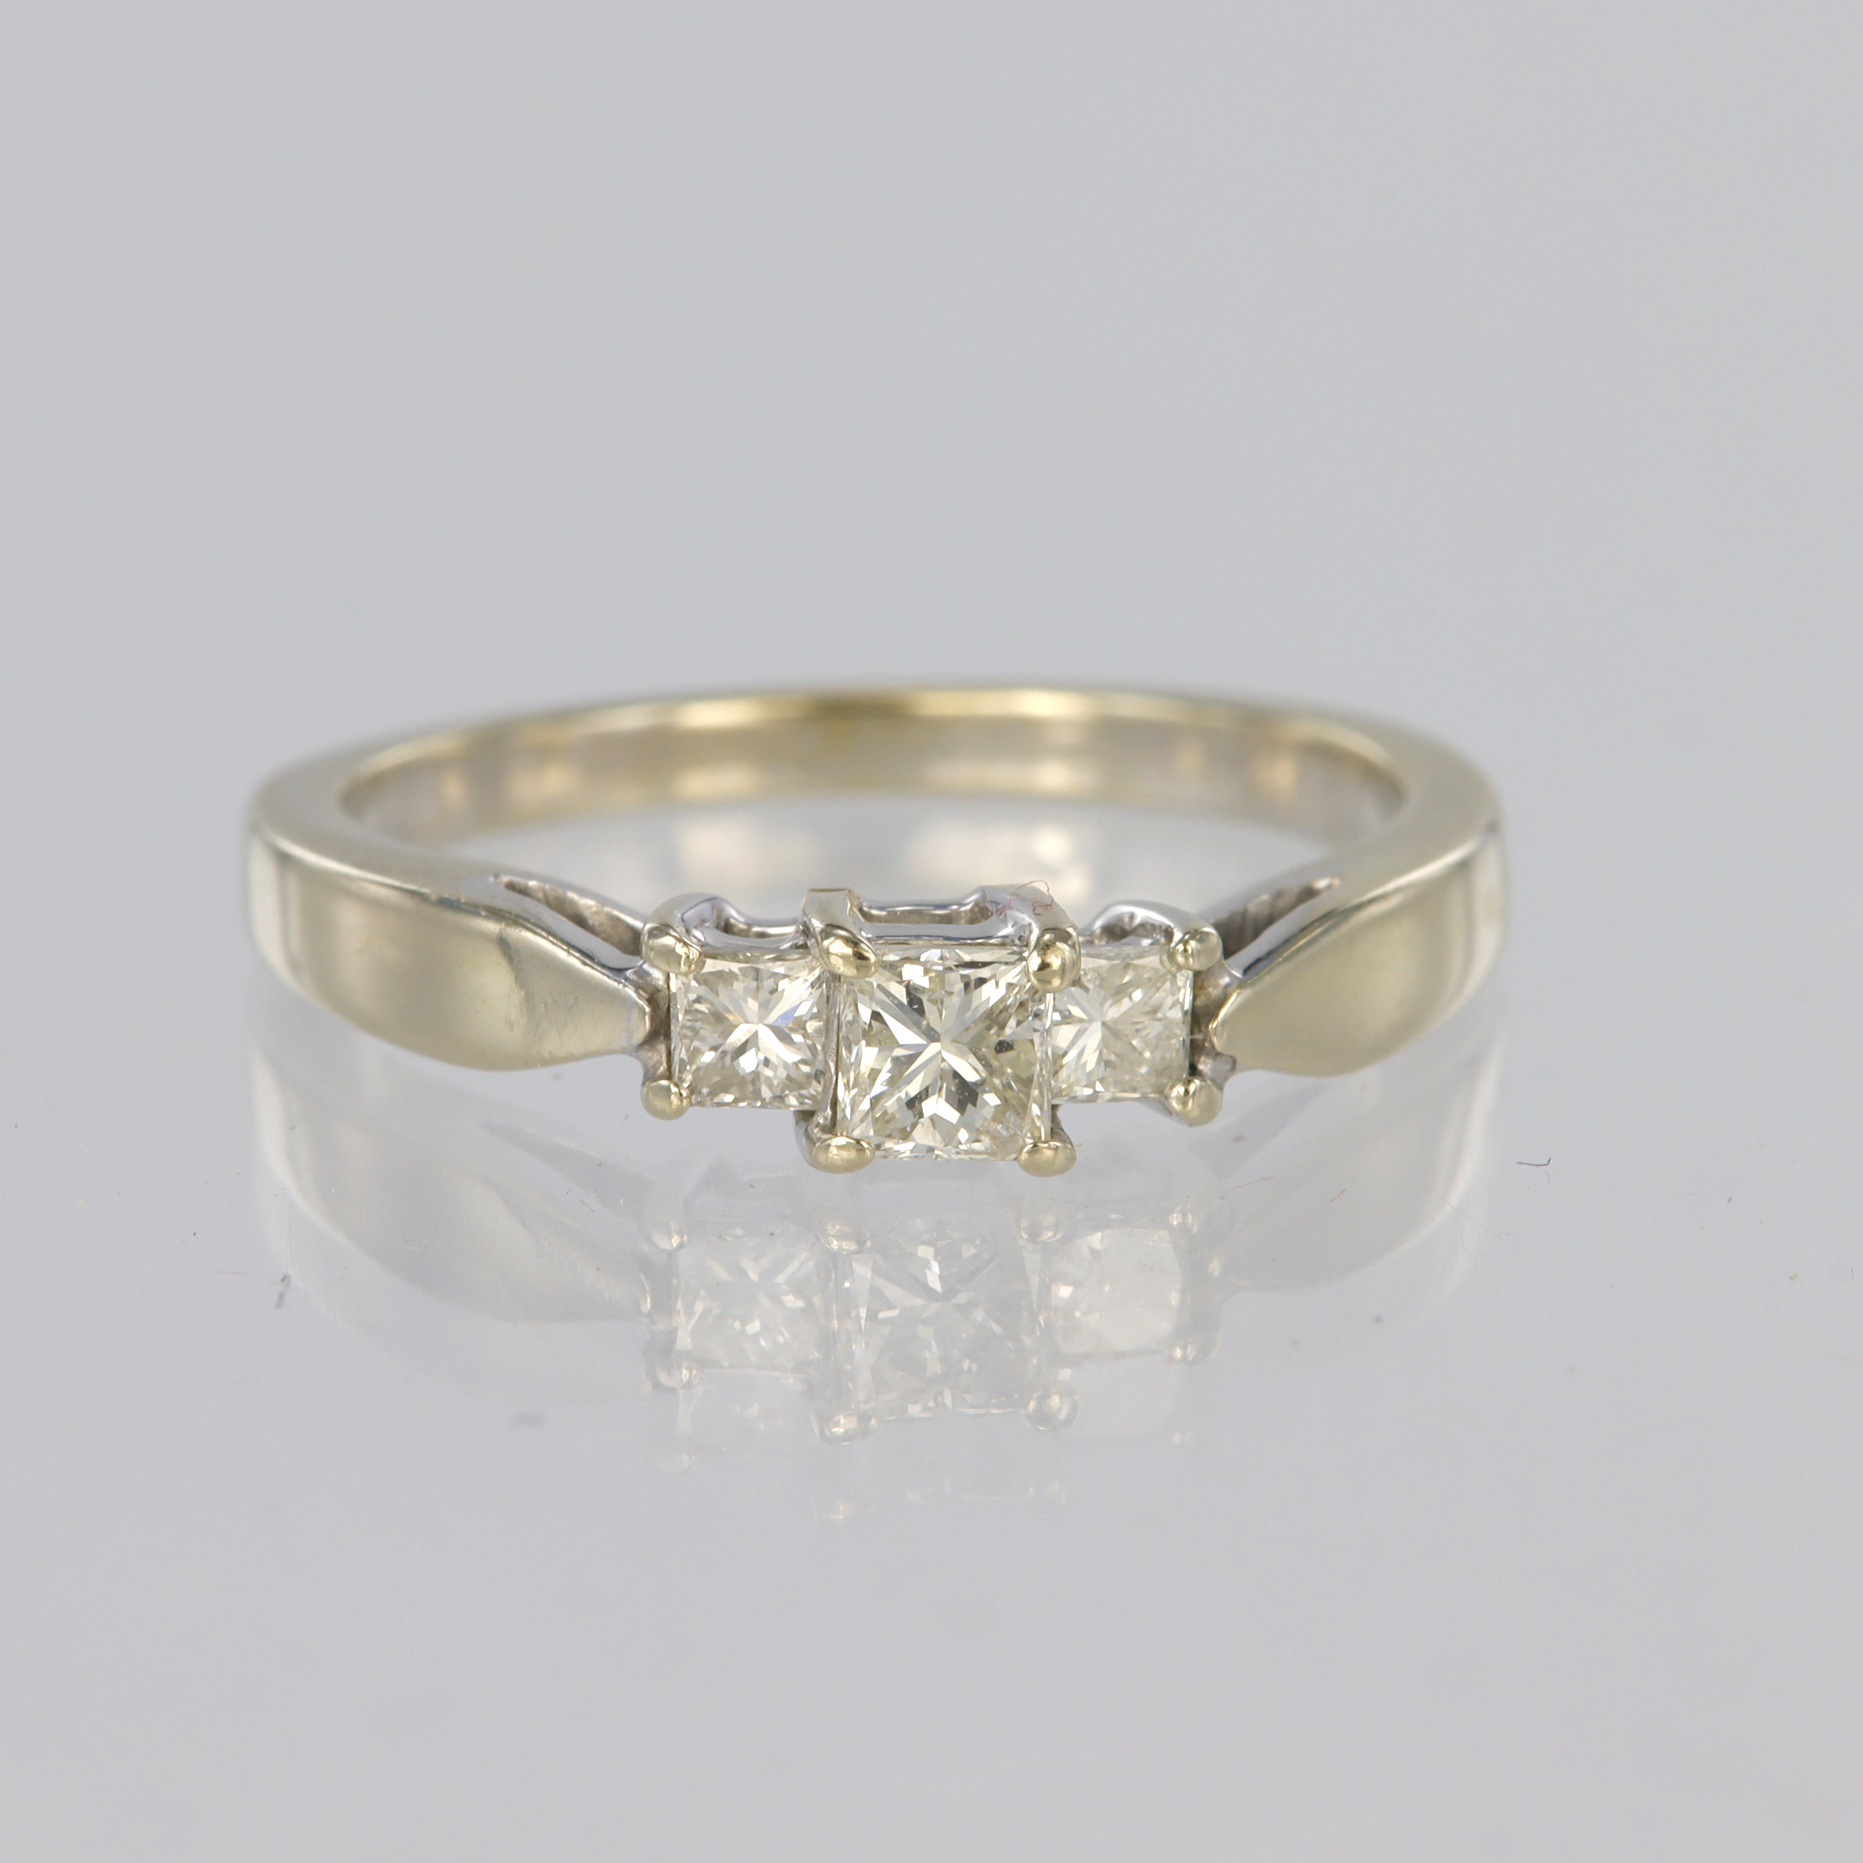 18ct white gold trilogy ring set with three graduated princess cut diamonds with a known total